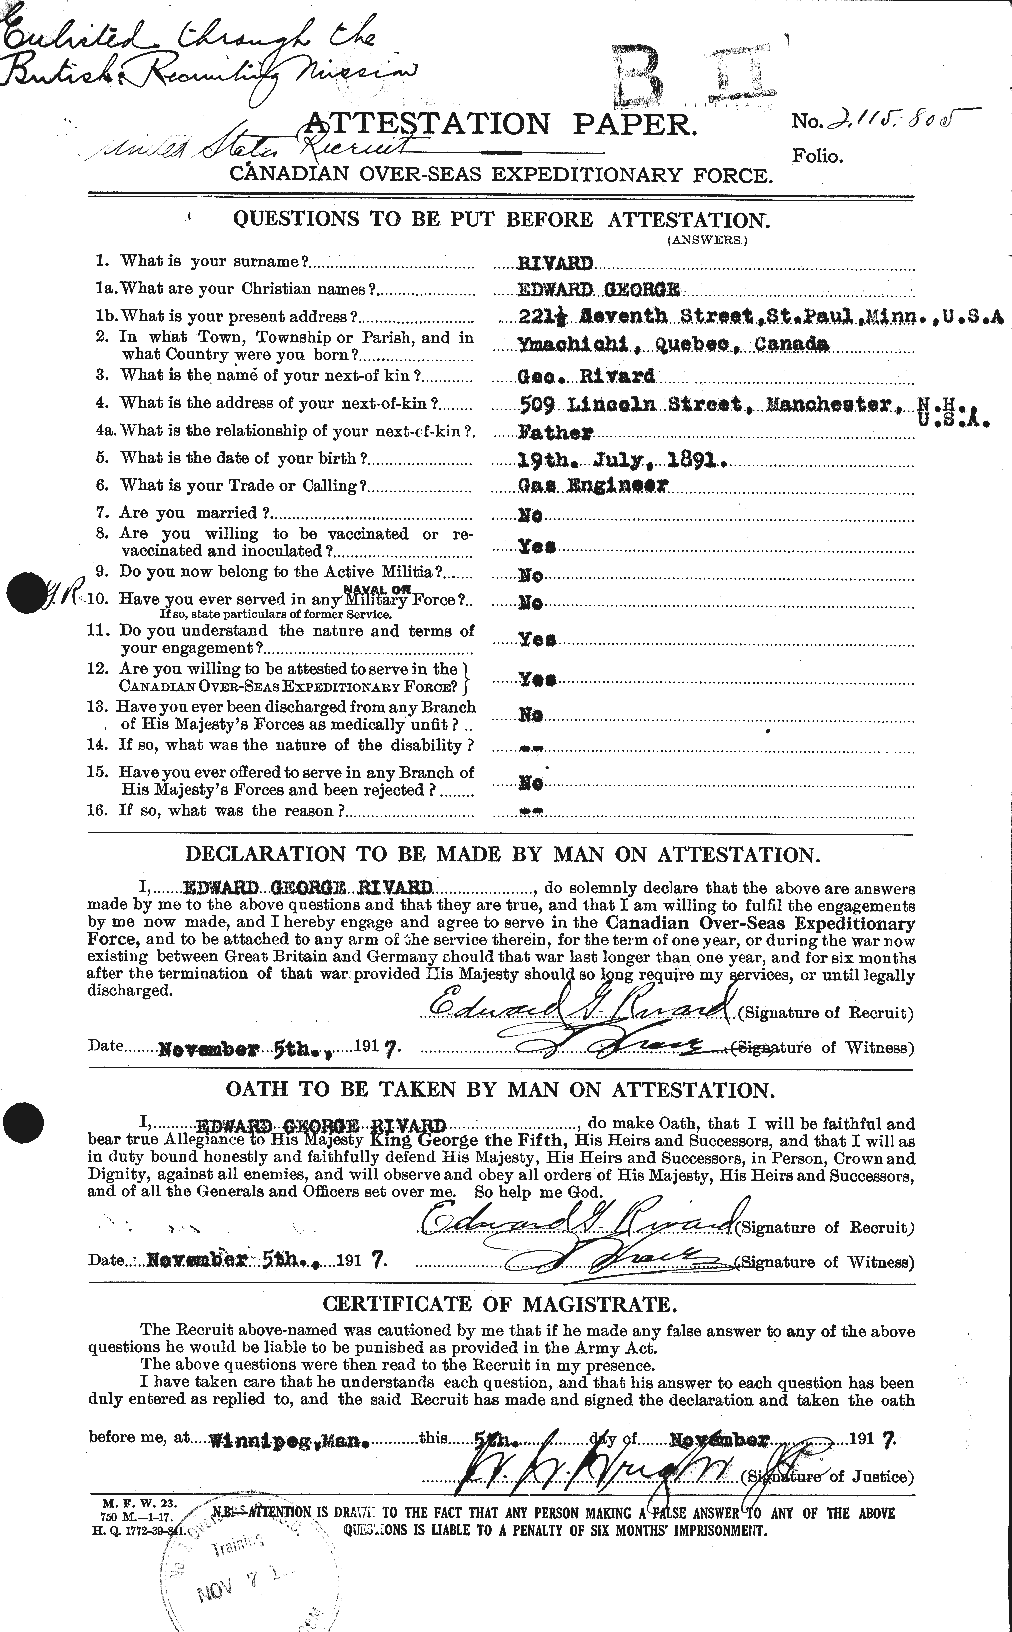 Personnel Records of the First World War - CEF 603989a